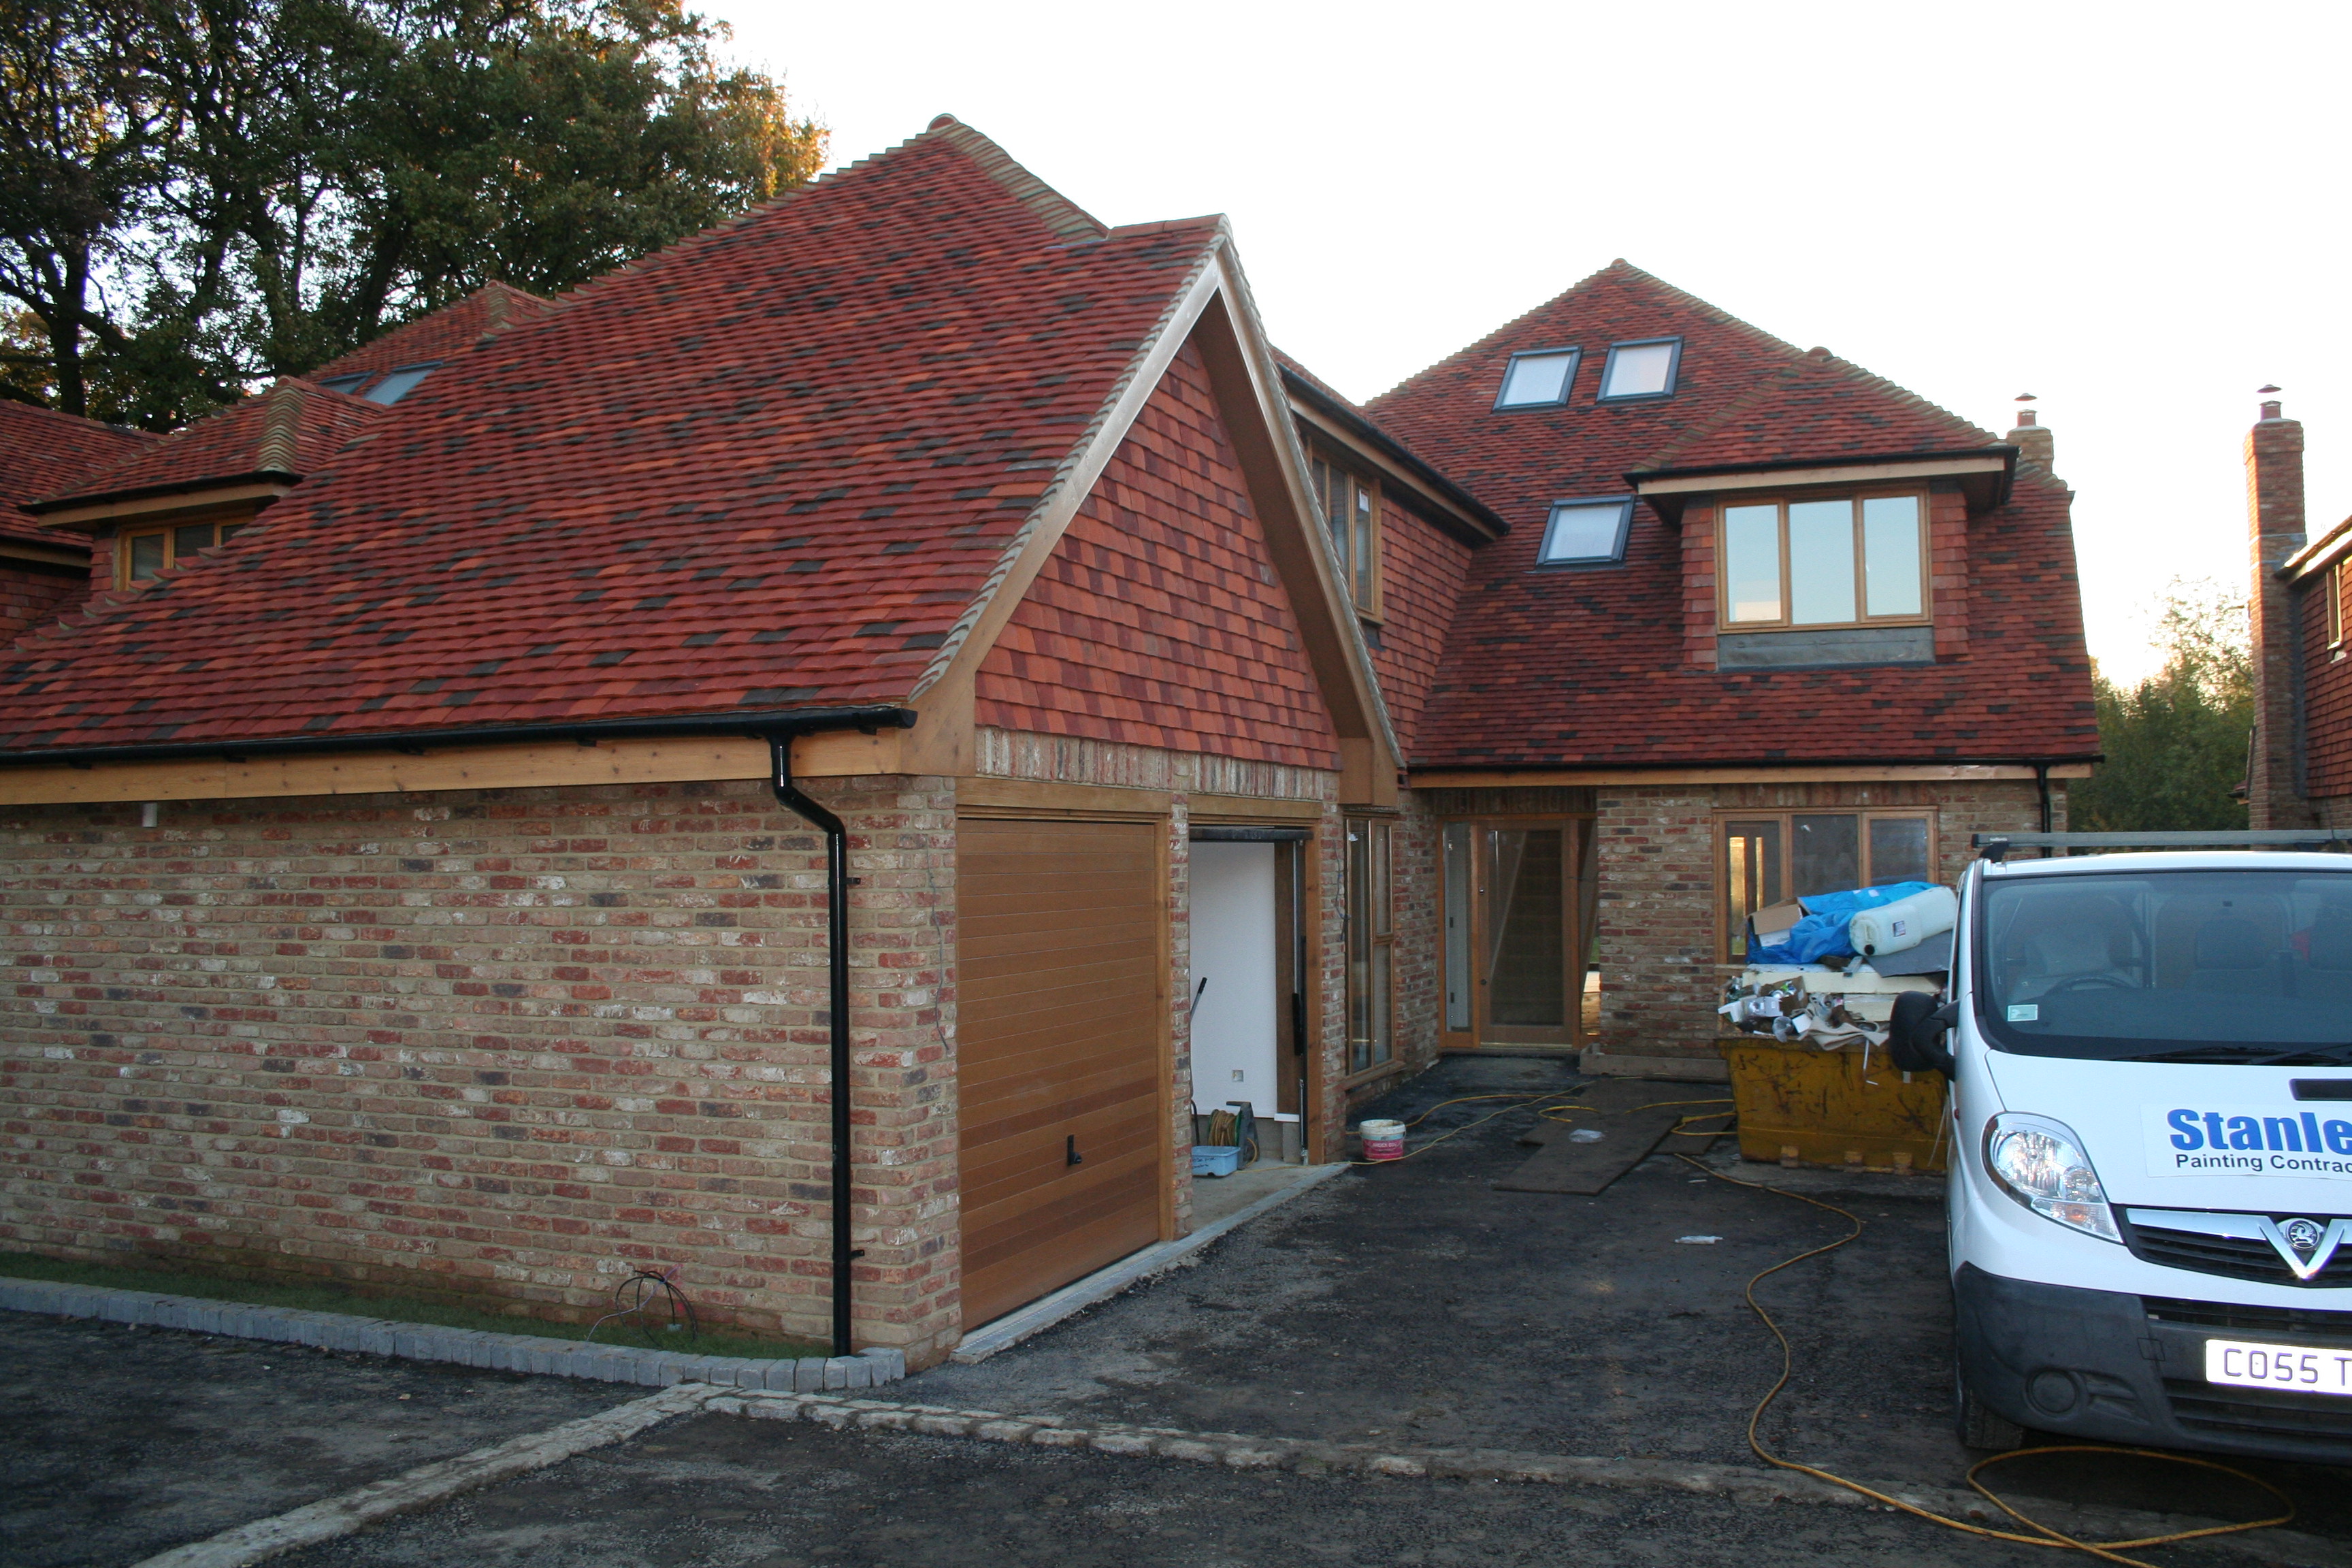 Landlord with no development experience receives £650k to build two semi-detached homes